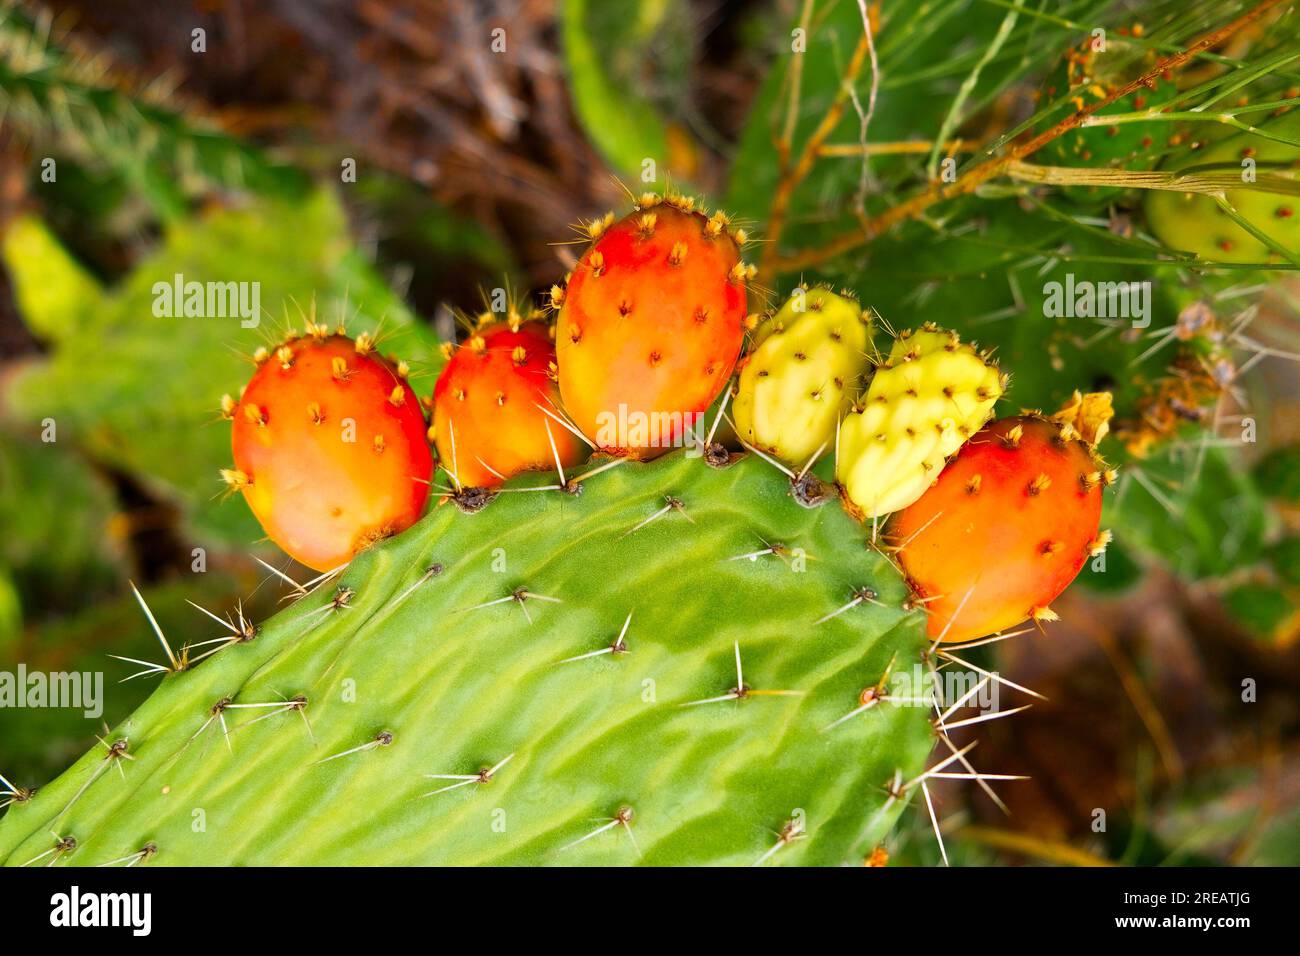 Many prickly pear fruits close view on a prickly pear plant. Stock Photo